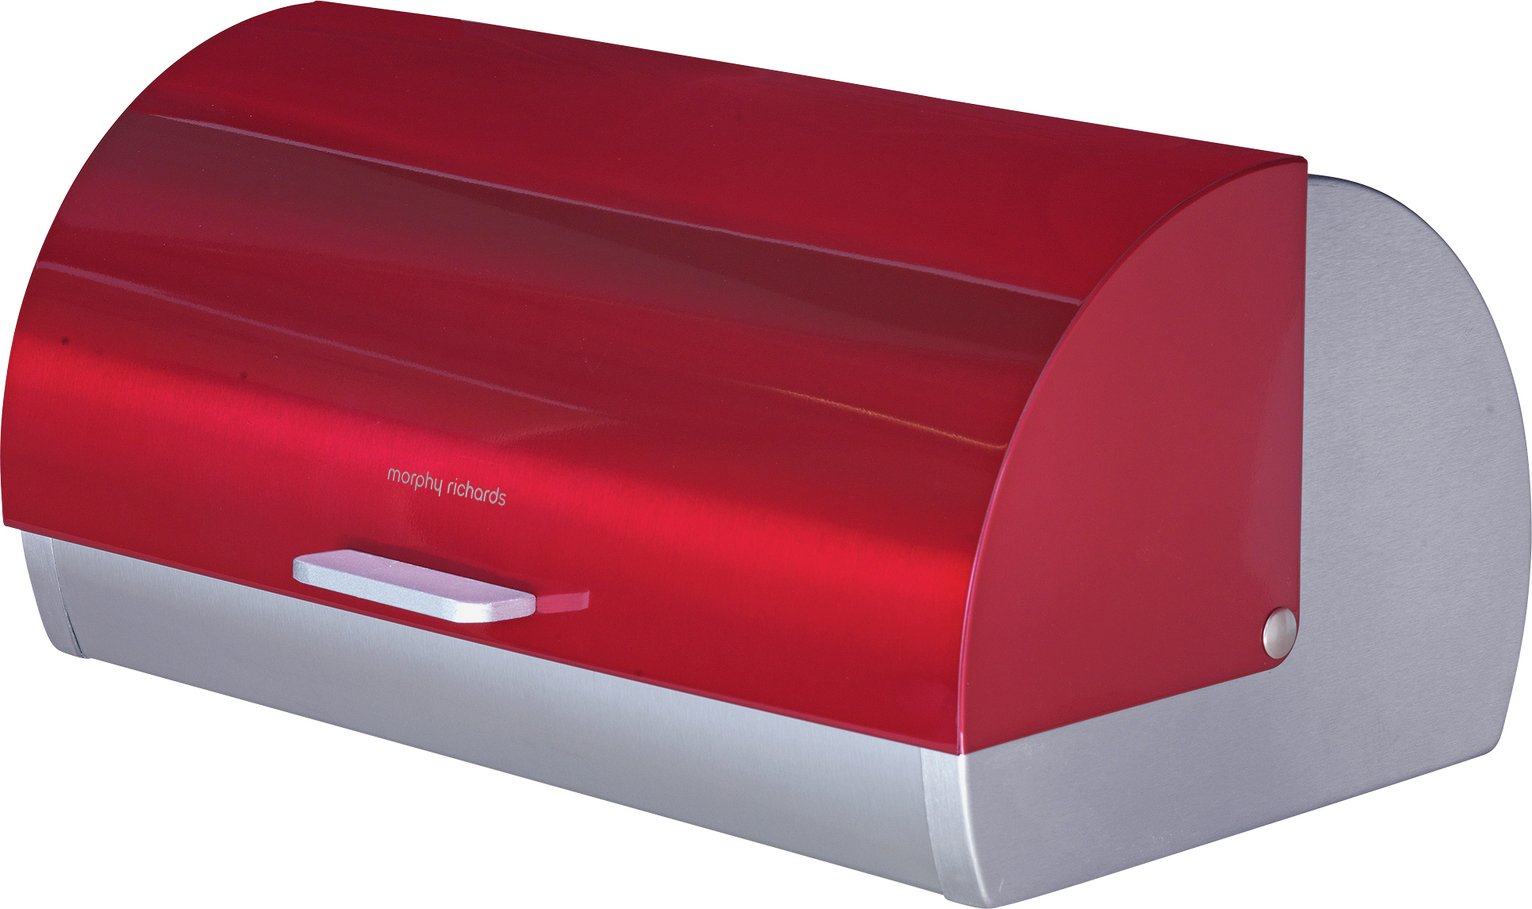 Morphy Richards Accents Bread Bin - Red